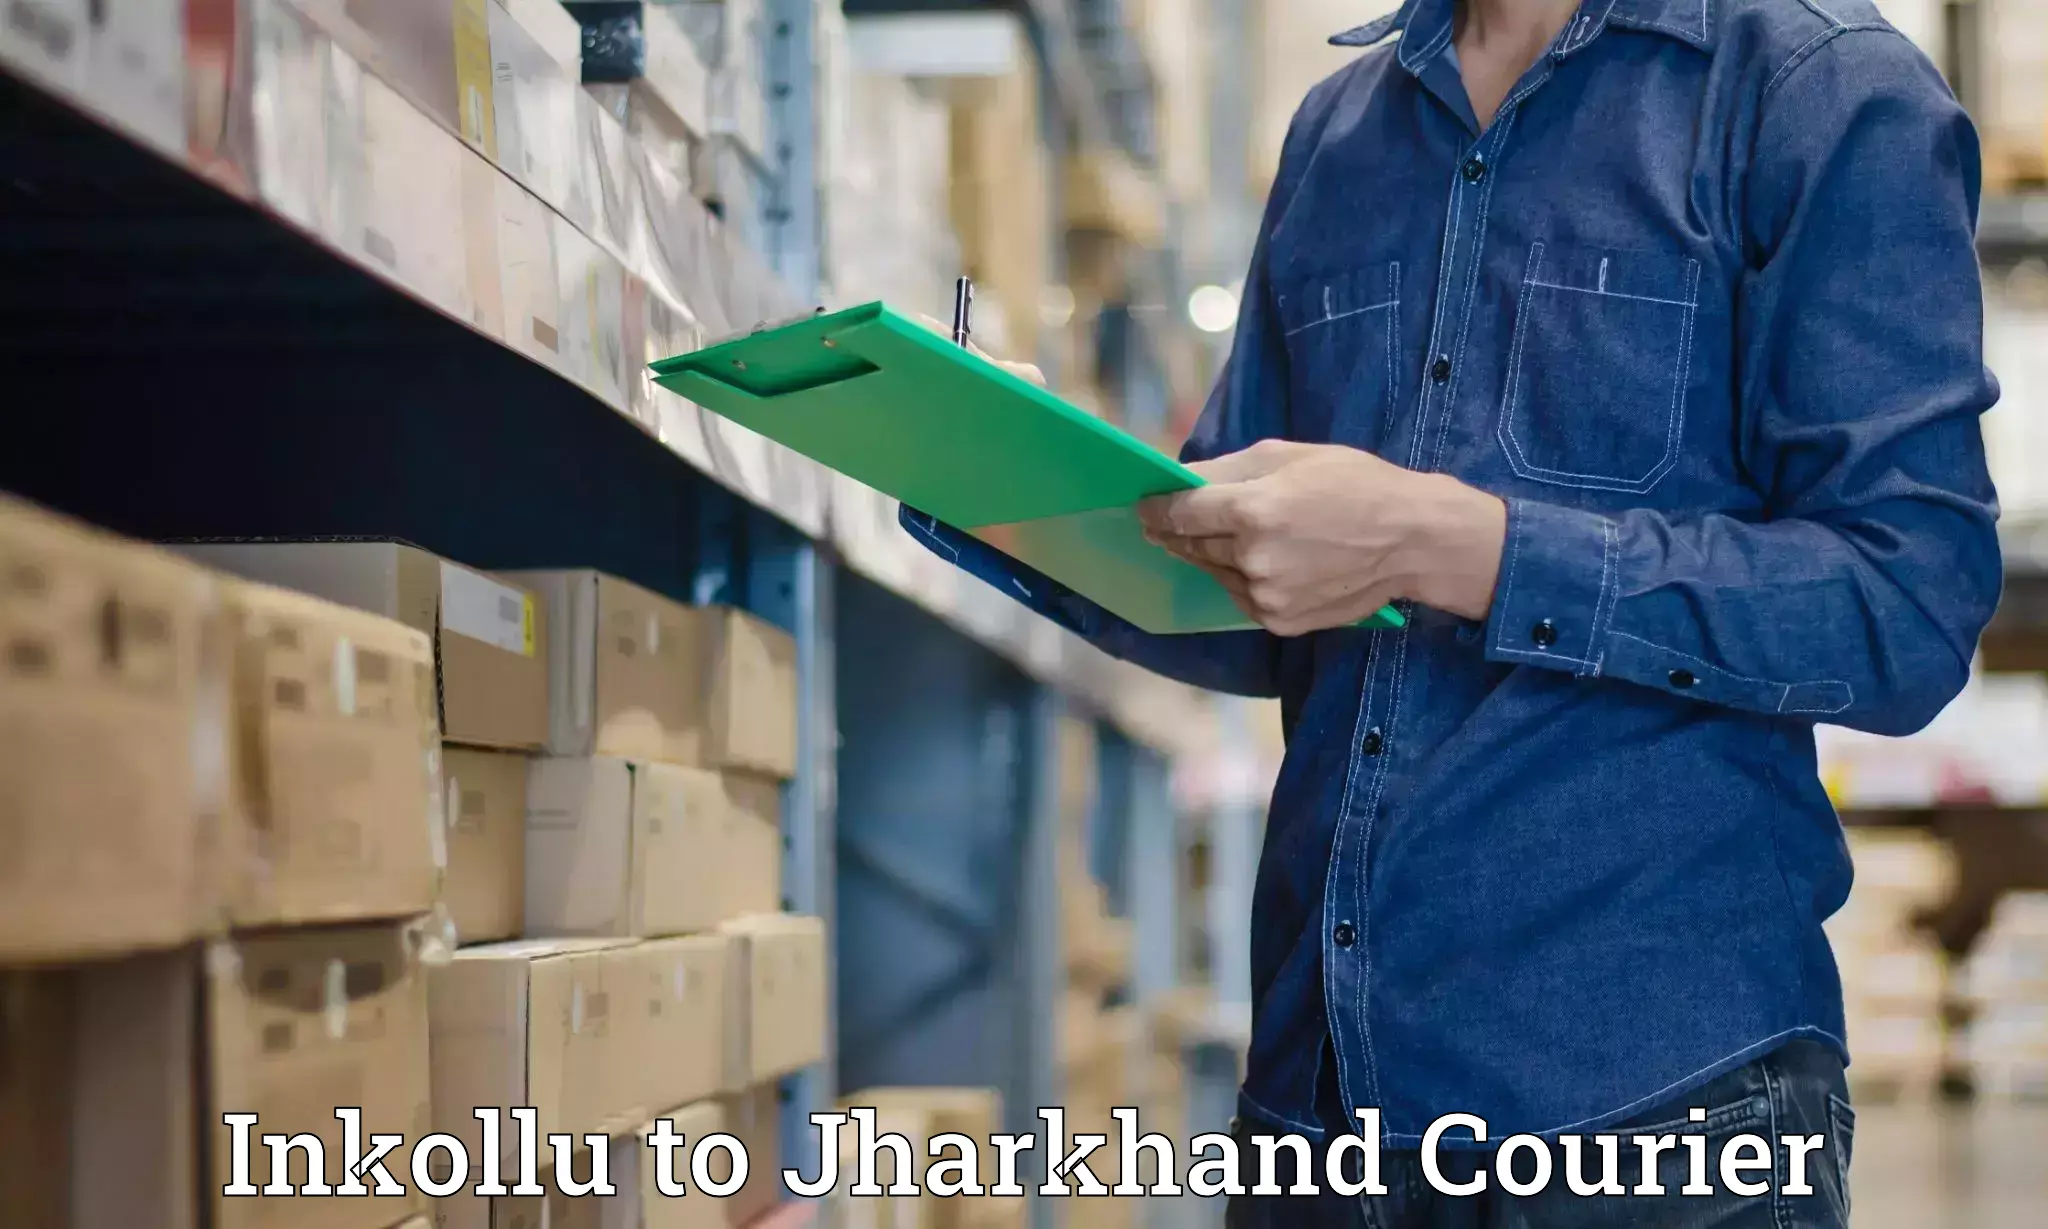 Personal parcel delivery in Inkollu to Jamshedpur